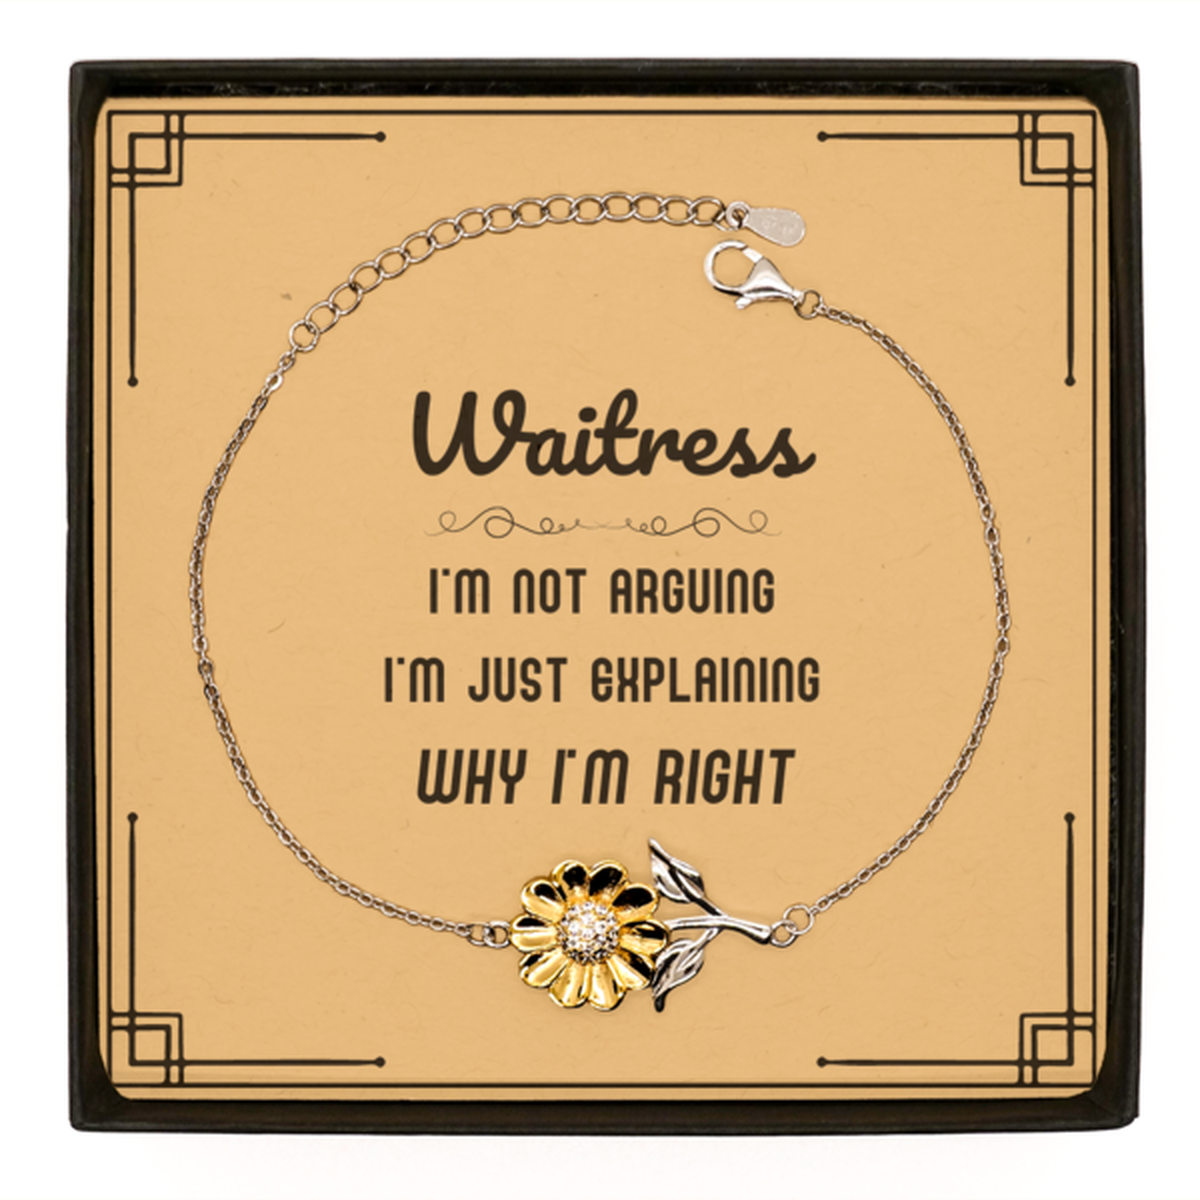 Waitress I'm not Arguing. I'm Just Explaining Why I'm RIGHT Sunflower Bracelet, Funny Saying Quote Waitress Gifts For Waitress Message Card Graduation Birthday Christmas Gifts for Men Women Coworker